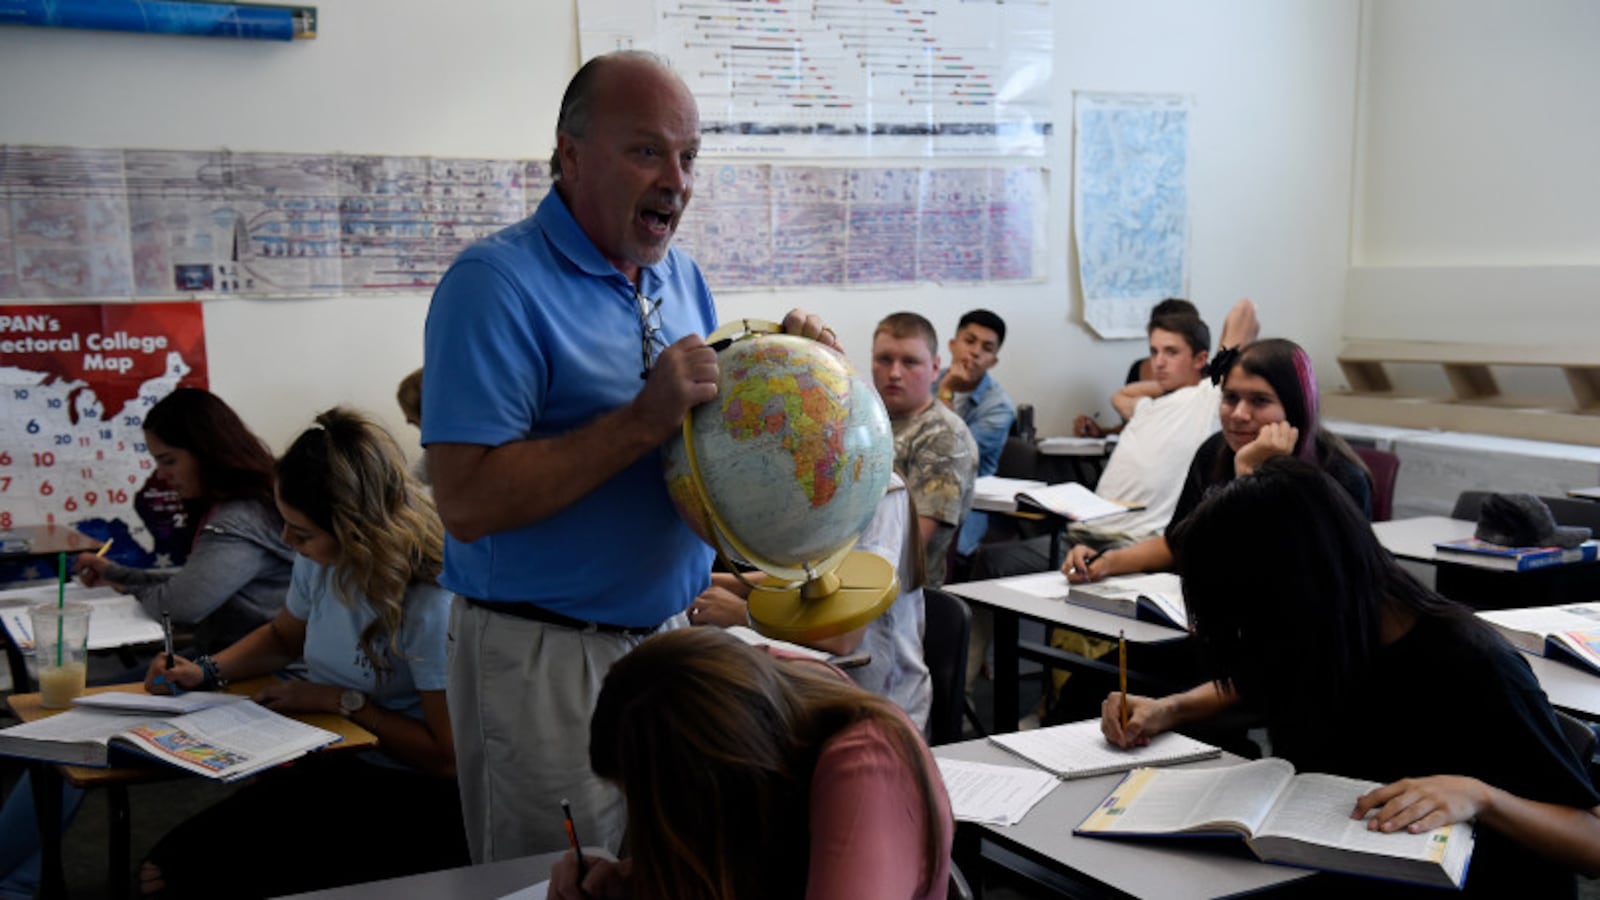 Tom Ritter holds up a globe as he teaches his students during a Political Science class in August of 2017 at Brighton High School. (Photo by Seth McConnell/The Denver Post)